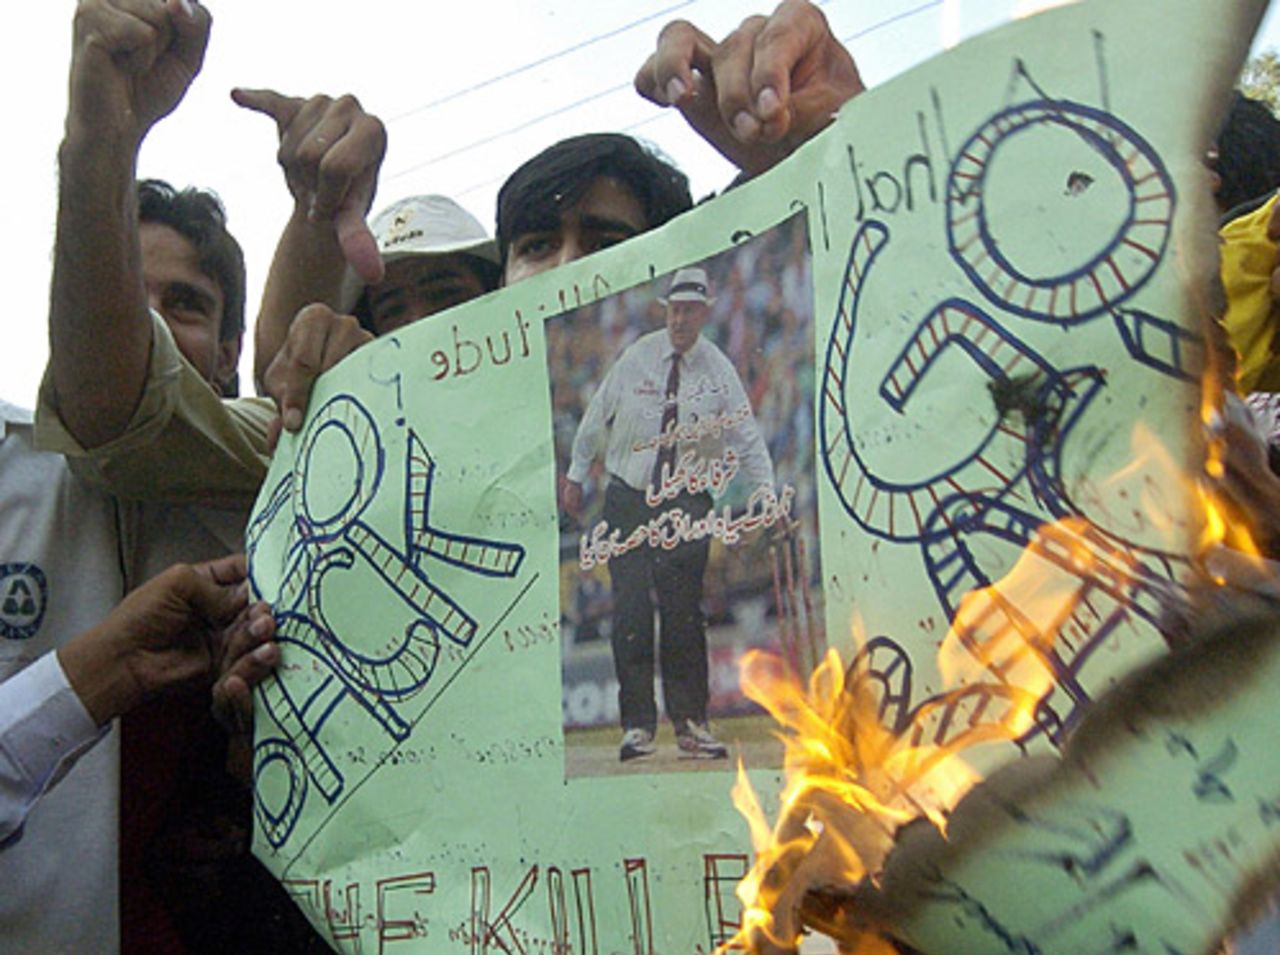 Pakistani protestors torch a placard of Darrell Hair during a rally, Lahore, August 22, 2006